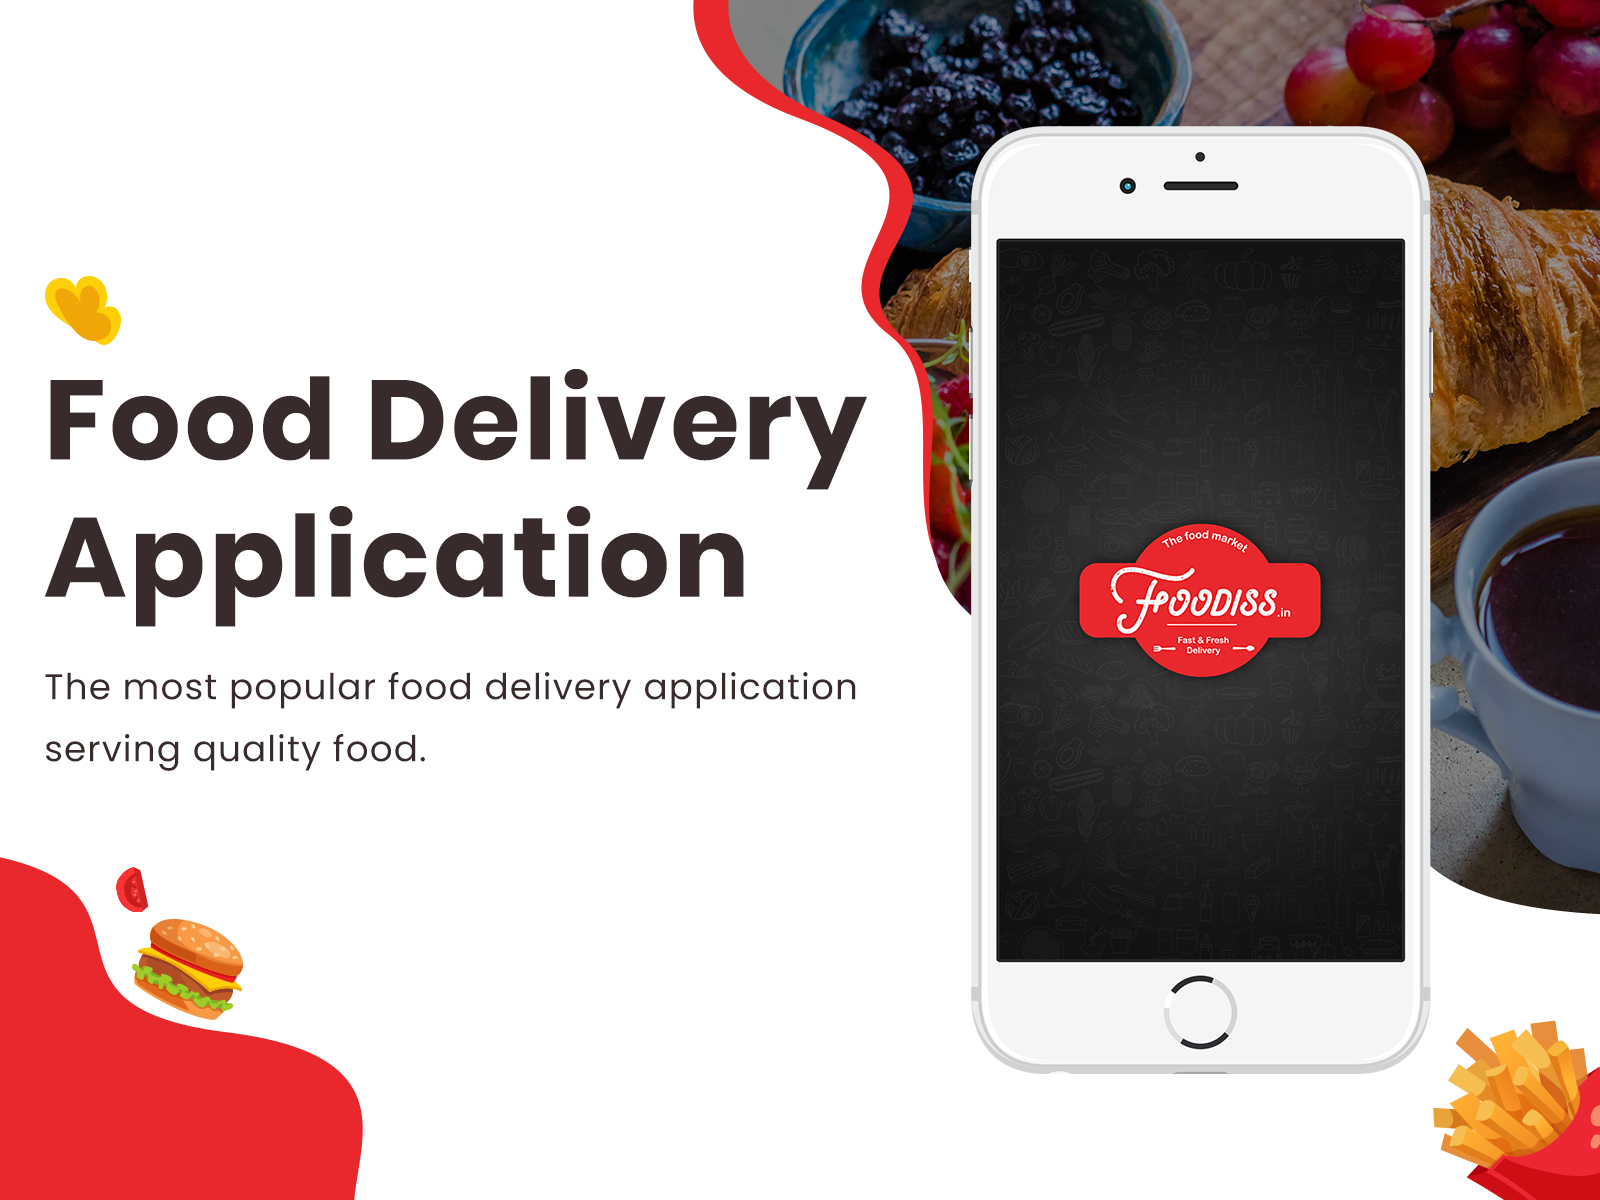 create your own delivery app